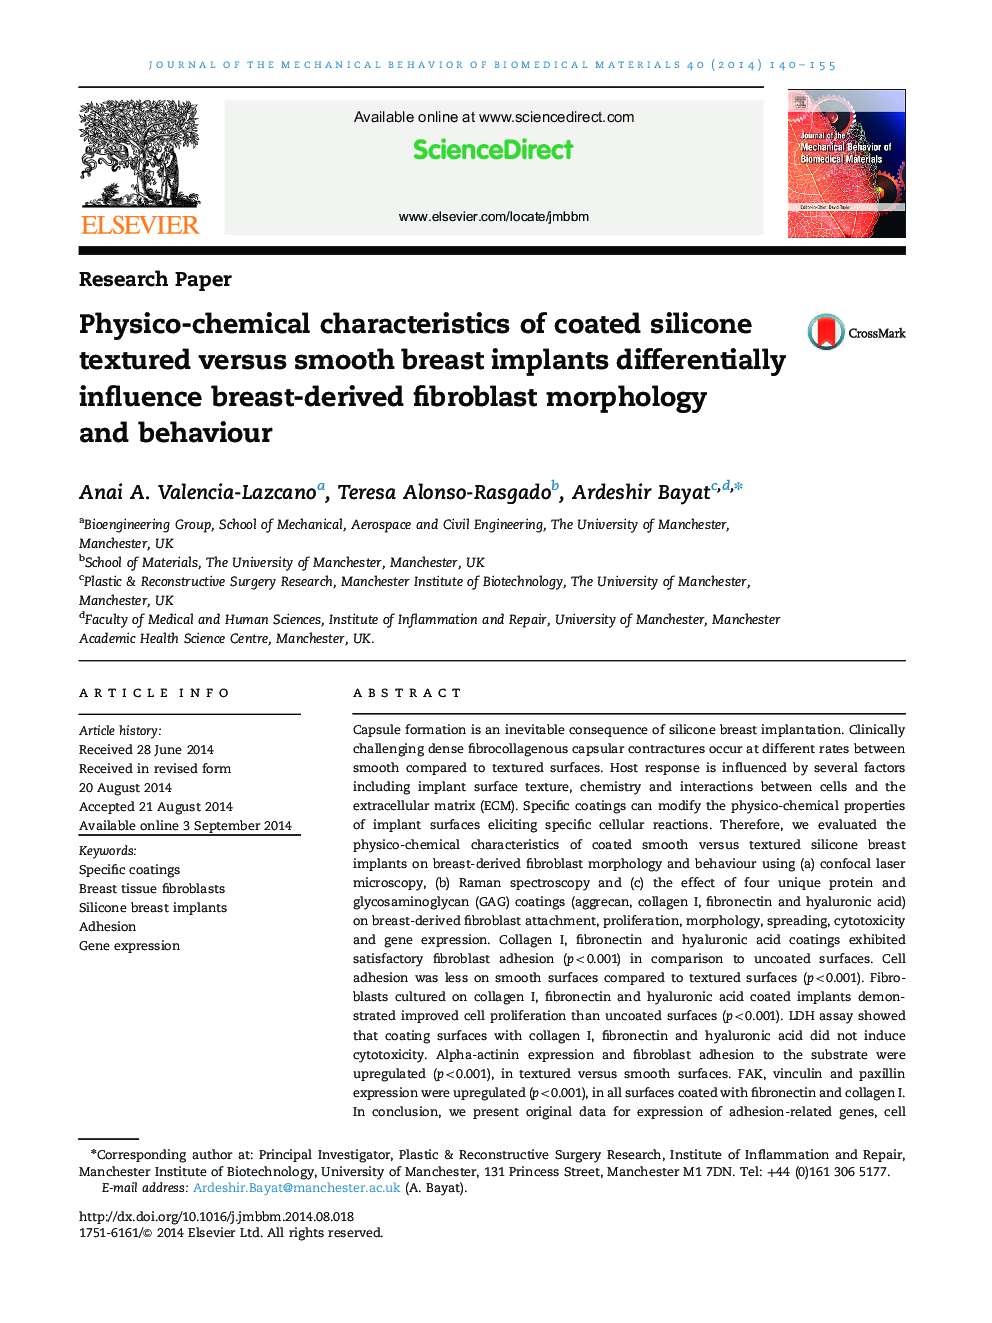 Physico-chemical characteristics of coated silicone textured versus smooth breast implants differentially influence breast-derived fibroblast morphology and behaviour